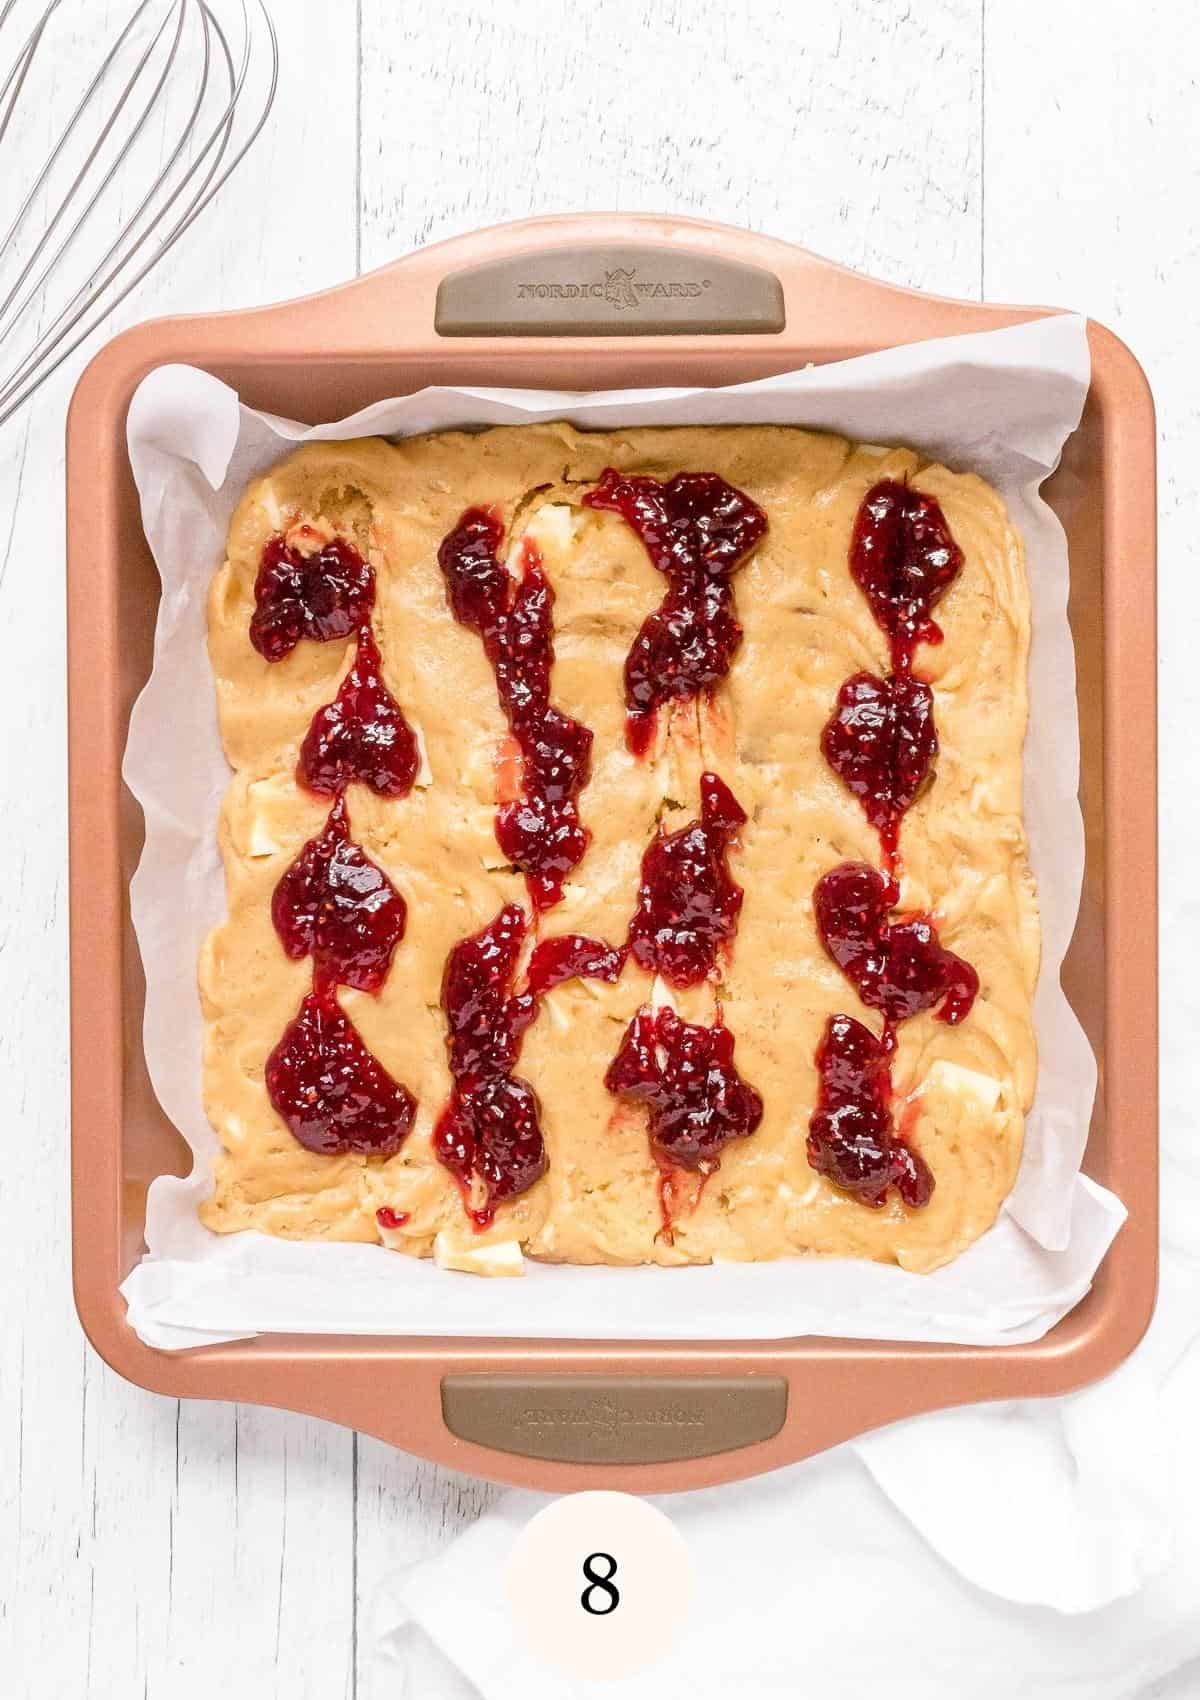 jam spread out in blondie batter